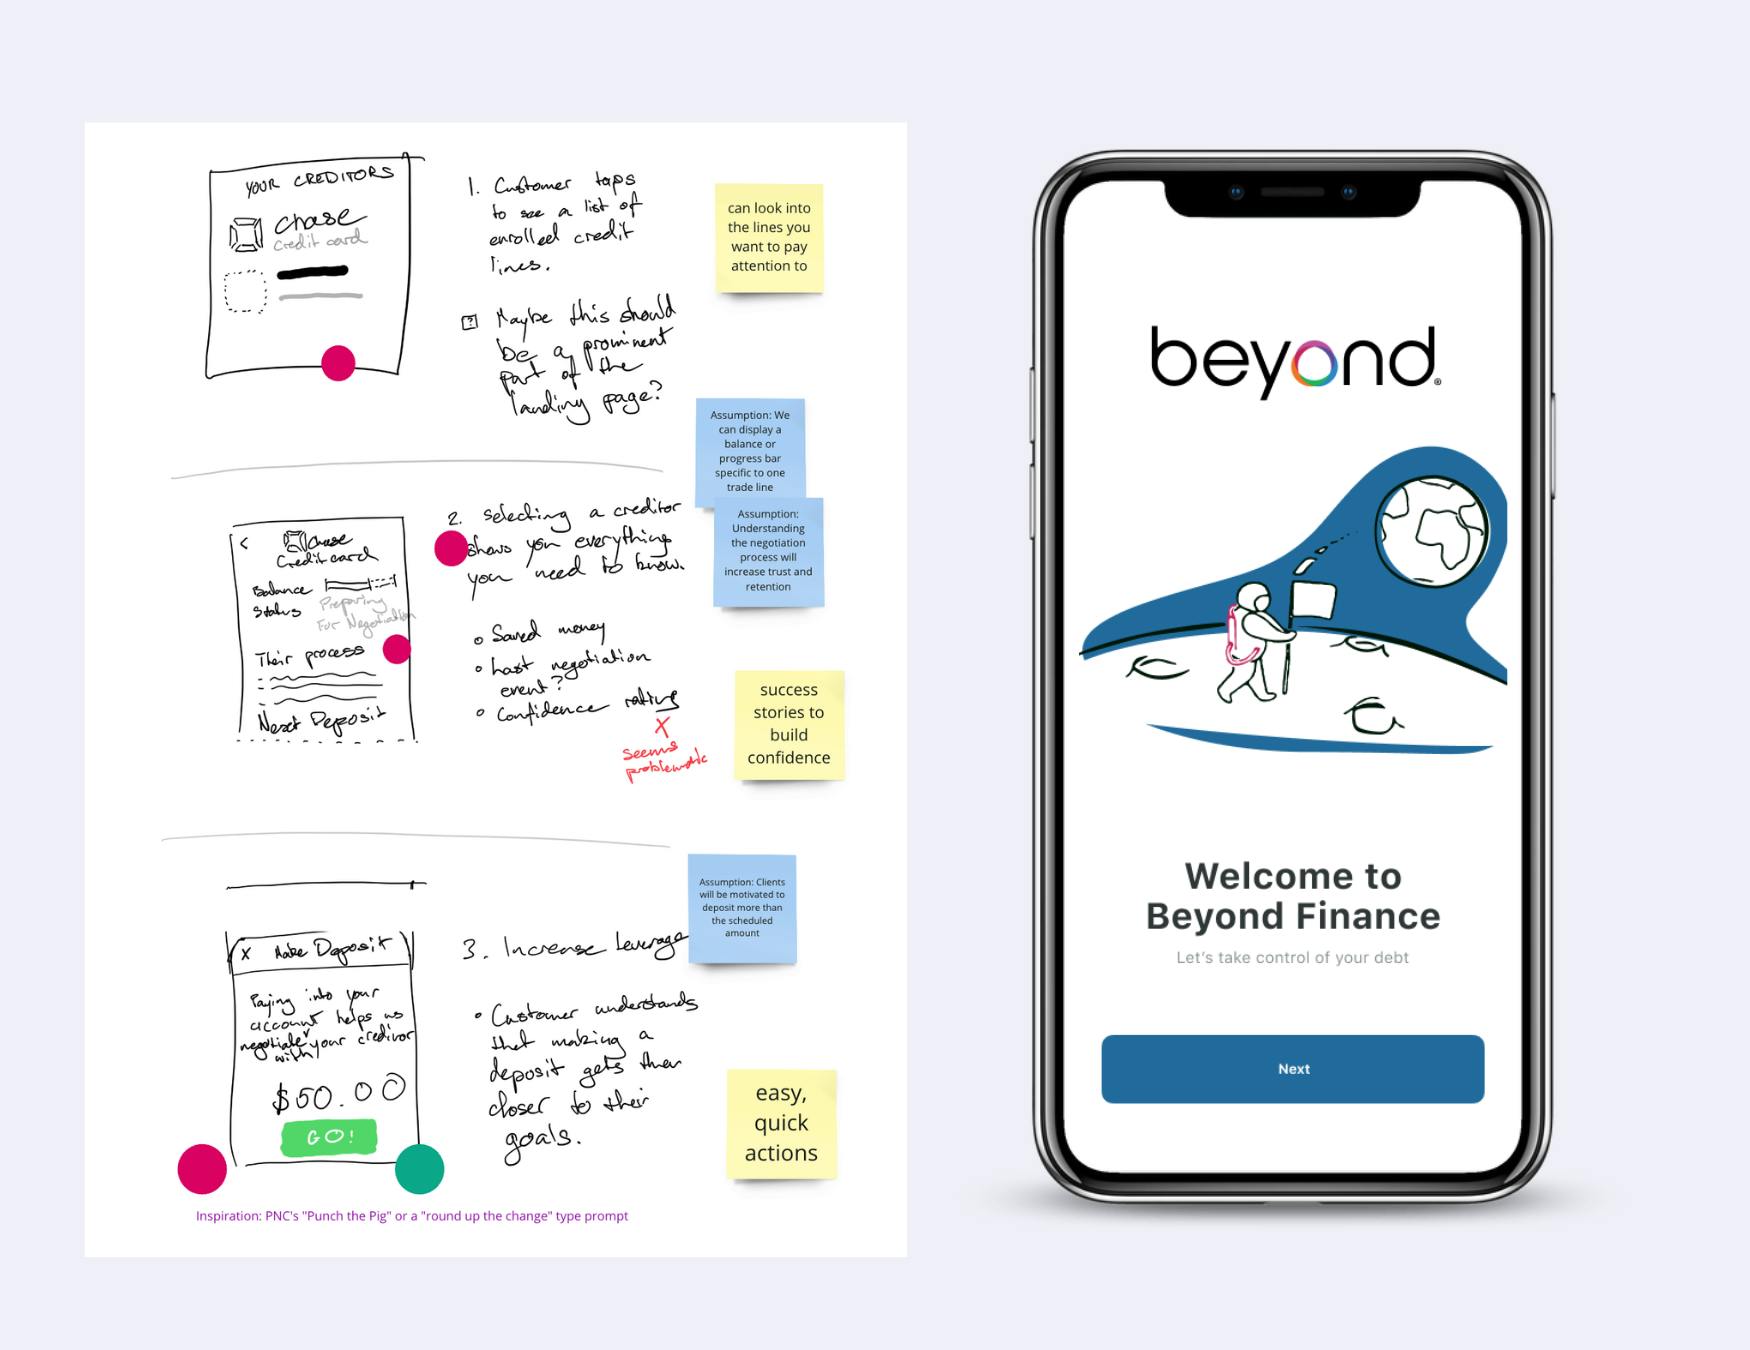 Sketches and post it notes showing the user flow of the Beyond Finance app alongside a mobile phone displaying the Beyond Finance welcome screen